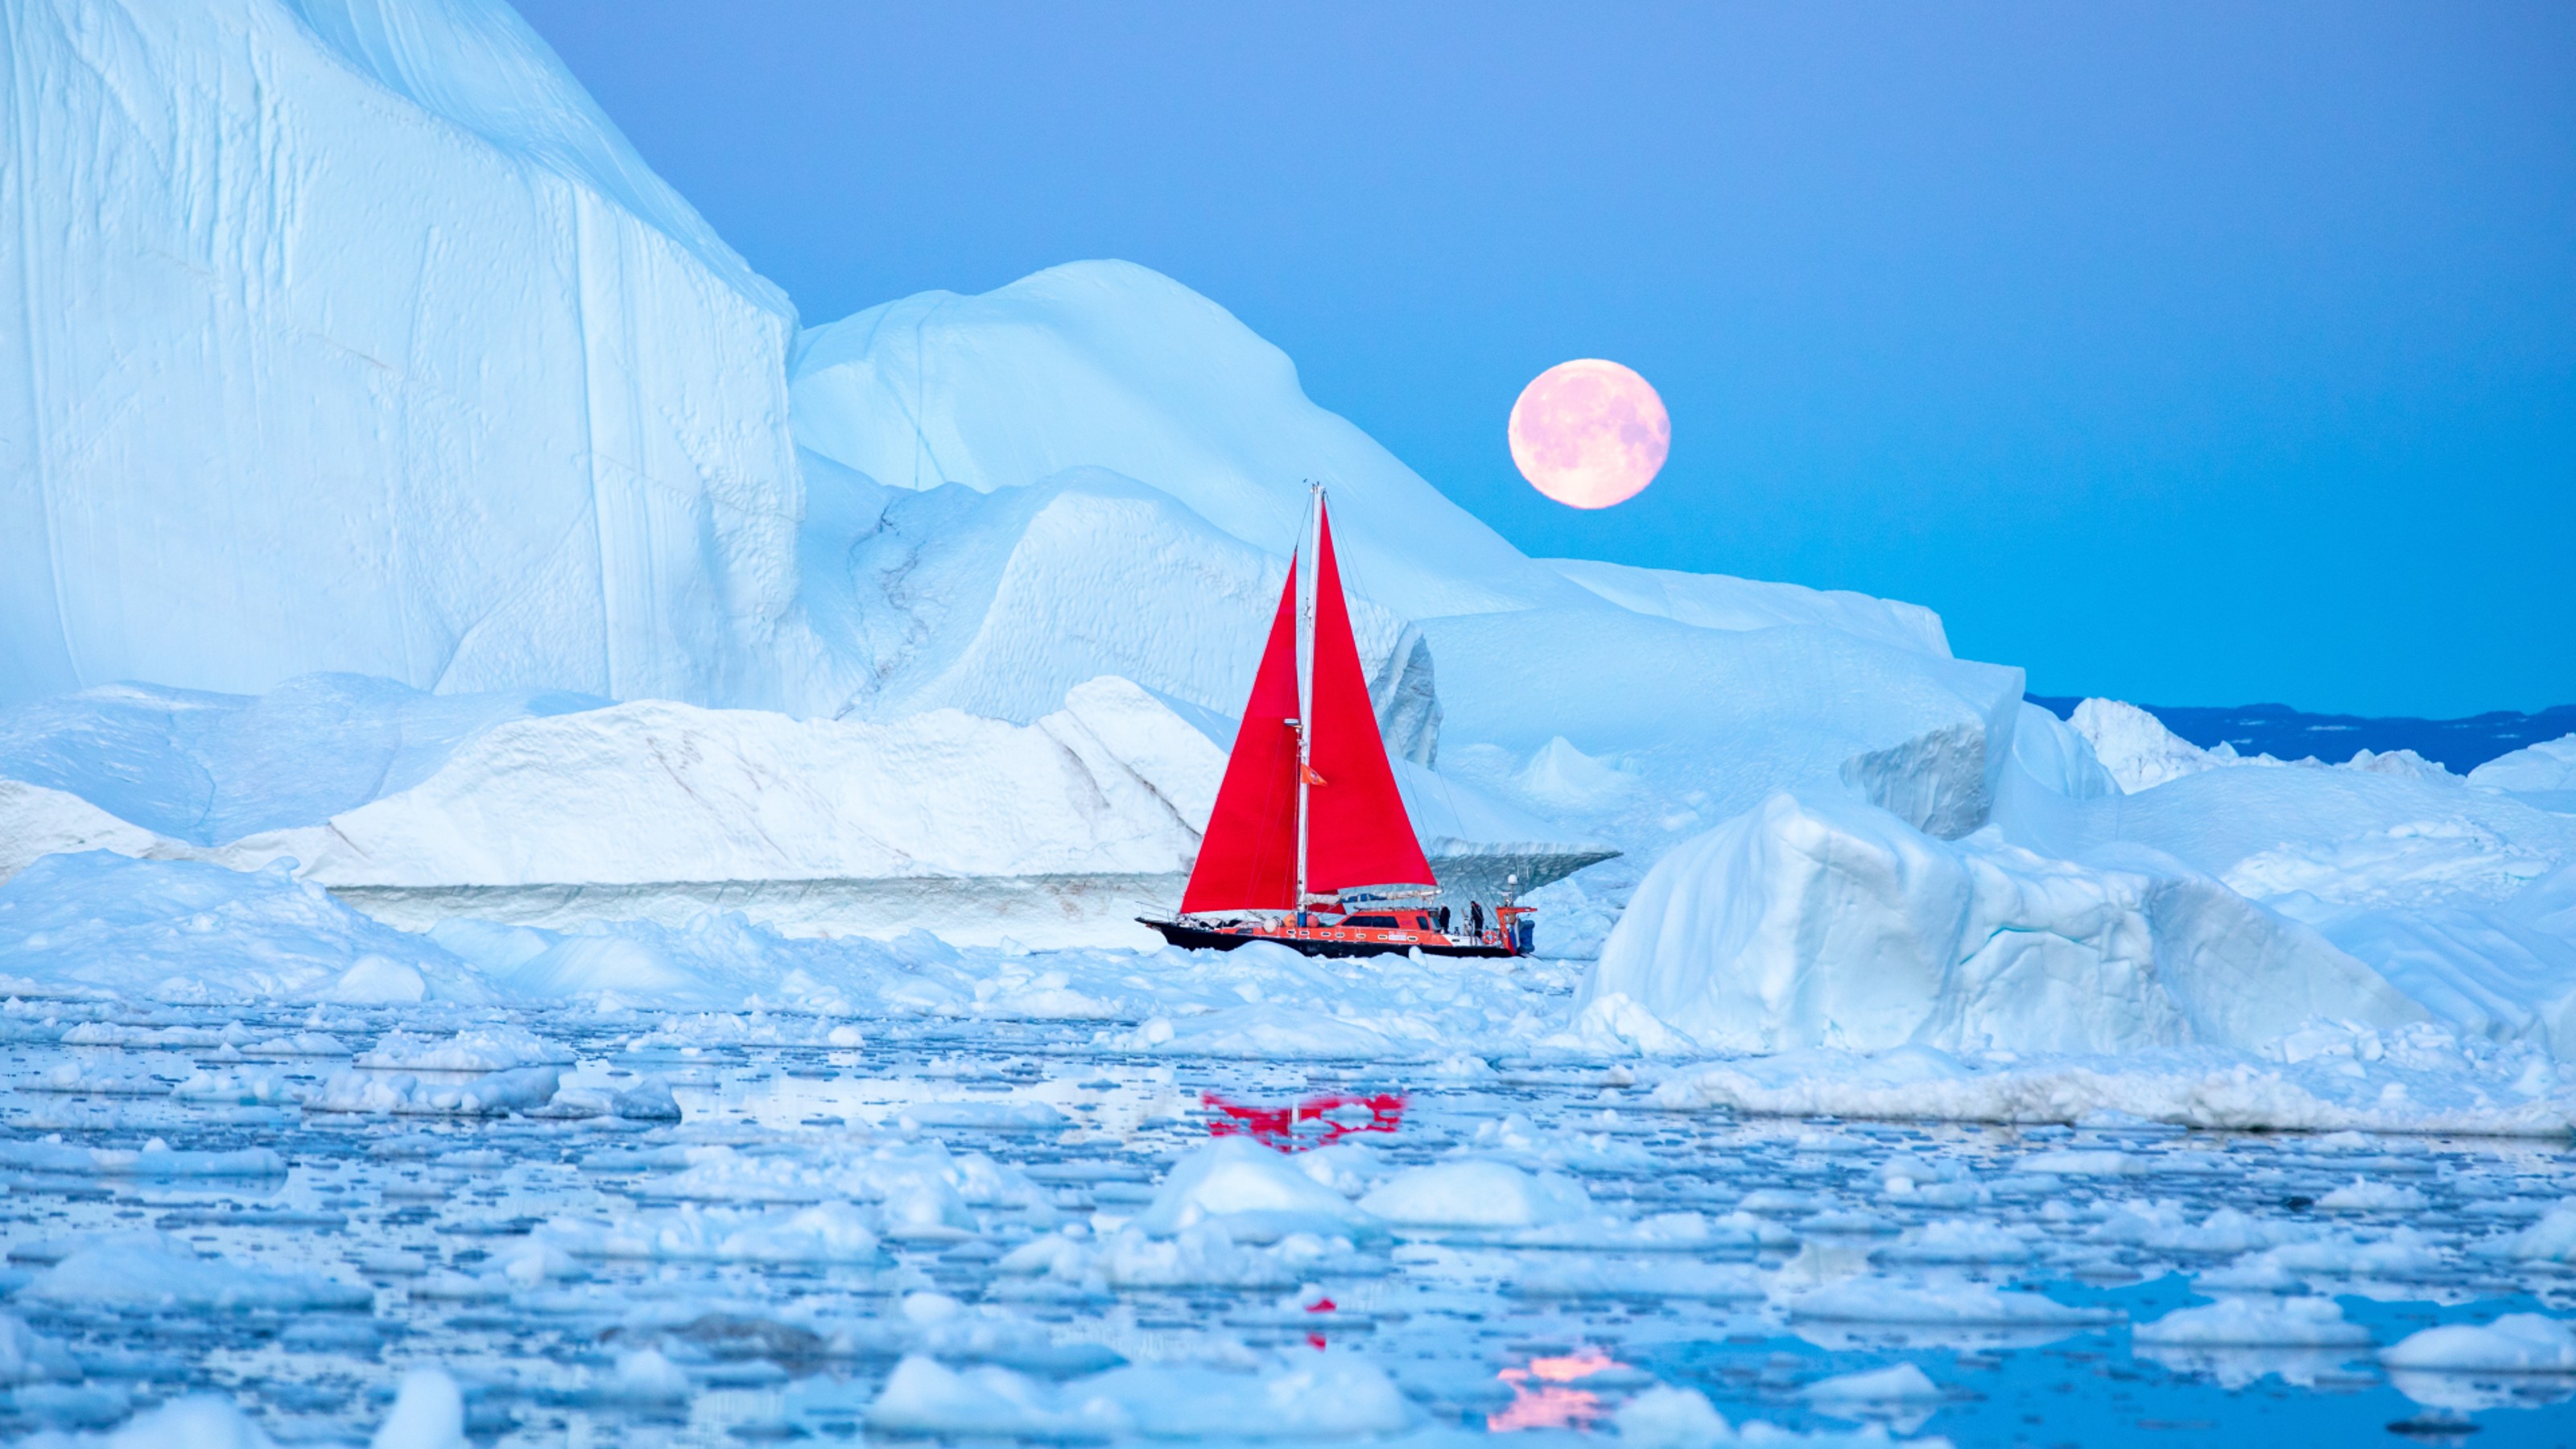 A sailboat with a red sail navigates through icy waters surrounded by large icebergs under a full moon.